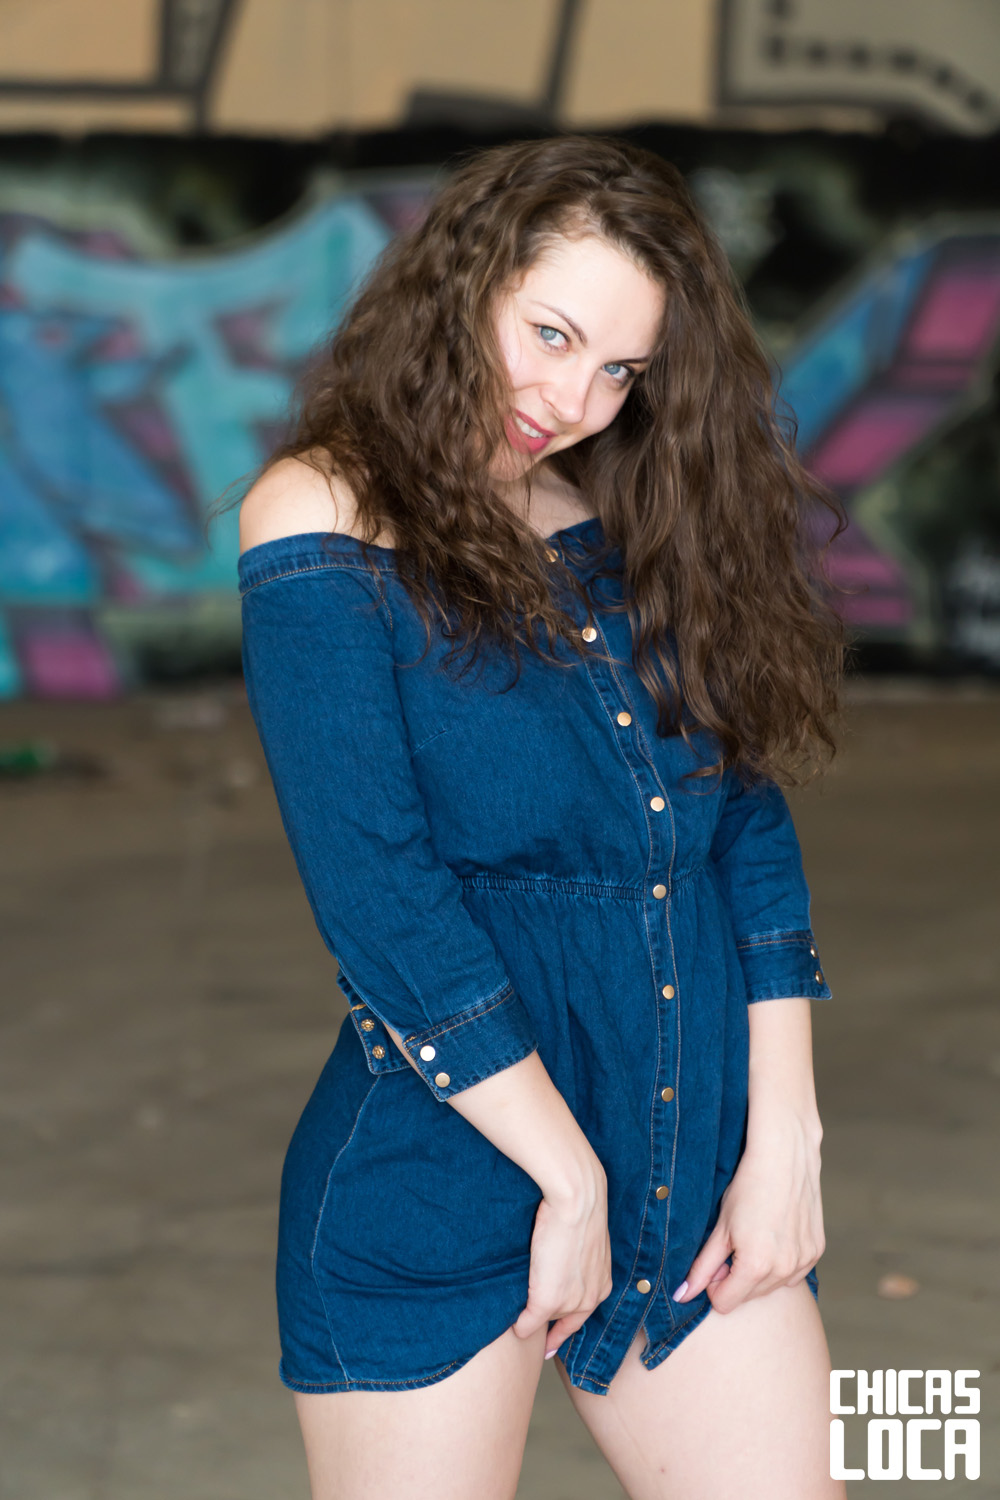 Sofia Curly enjoys sneaky sex in an abandoned warehouse